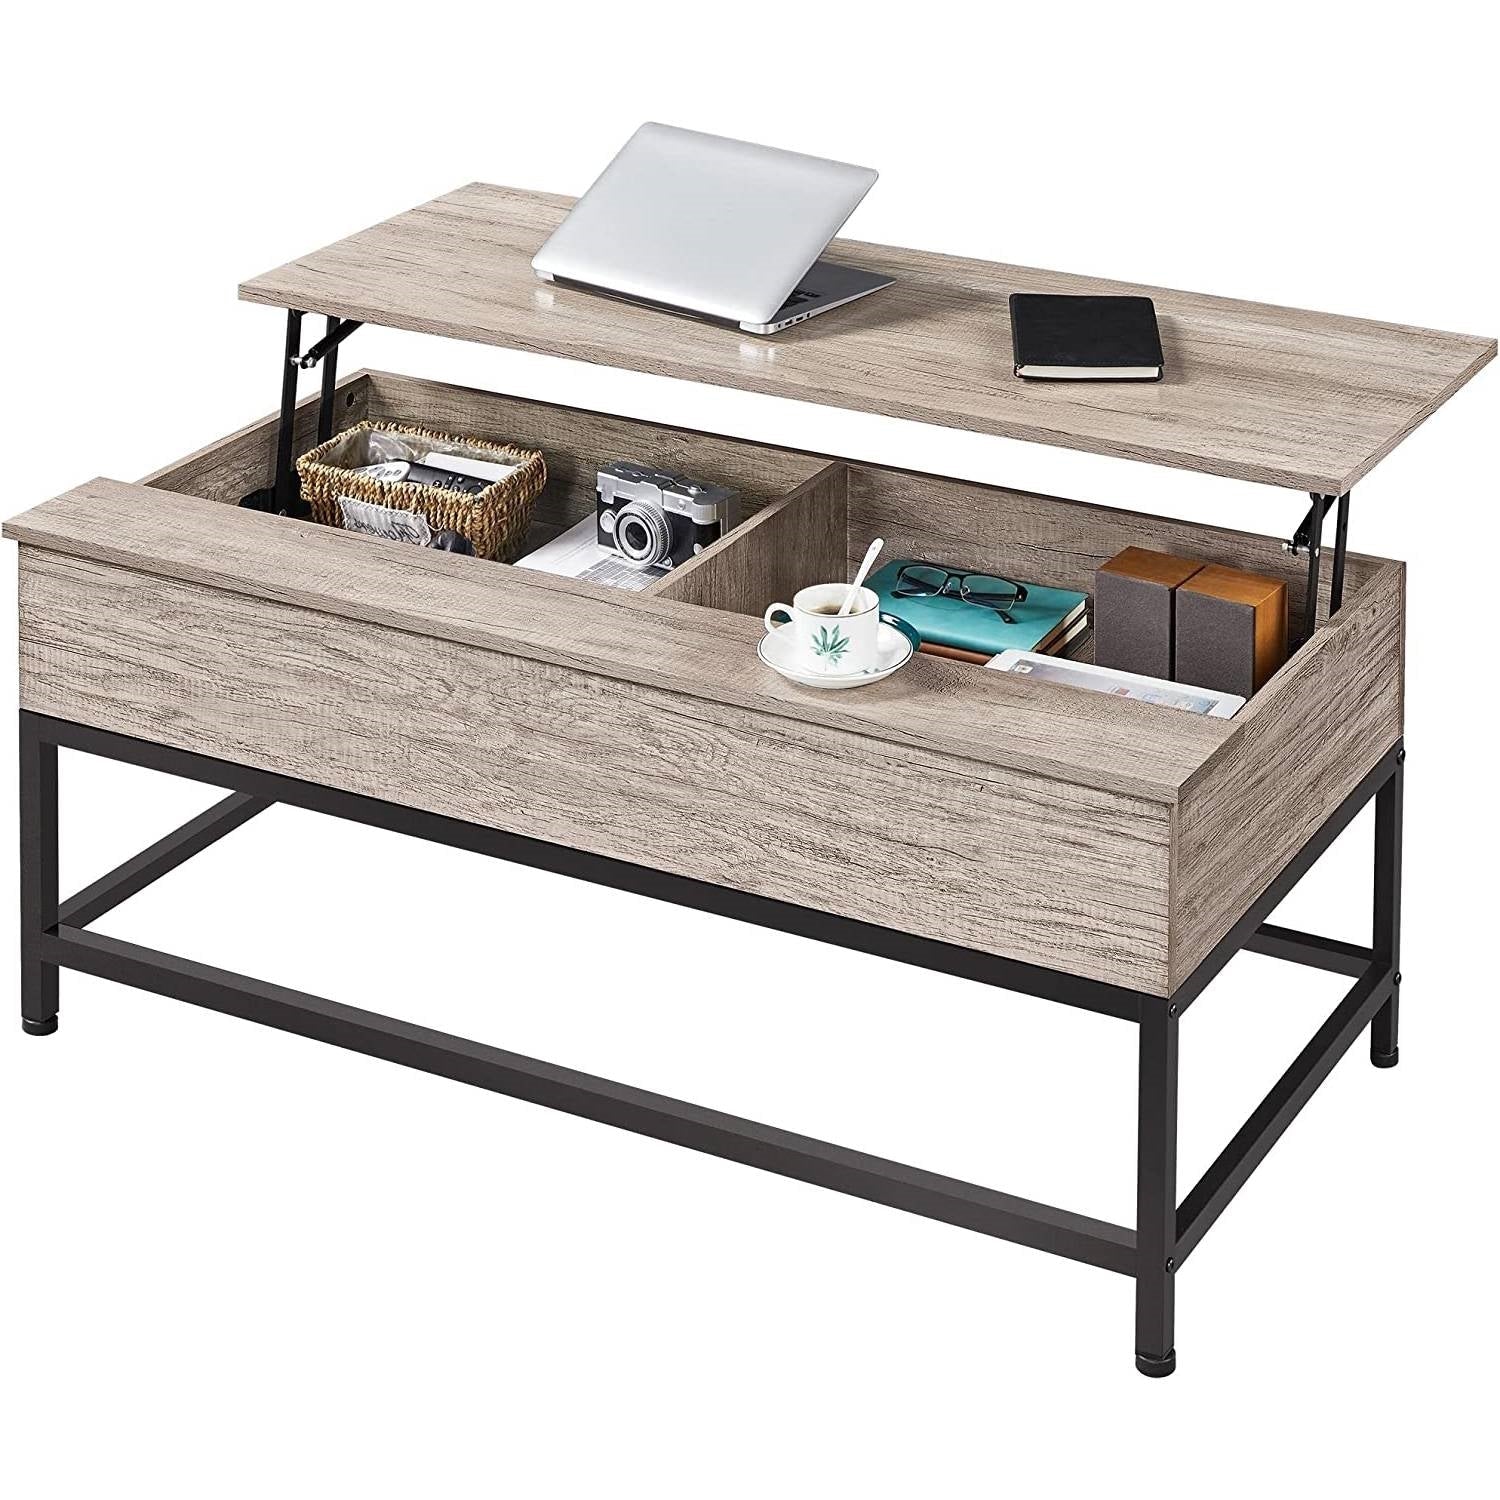 Living Room > Coffee Tables - Modern Metal Wood Lift-Top Coffee Table Sofa Laptop Desk In Grey Wood Finish